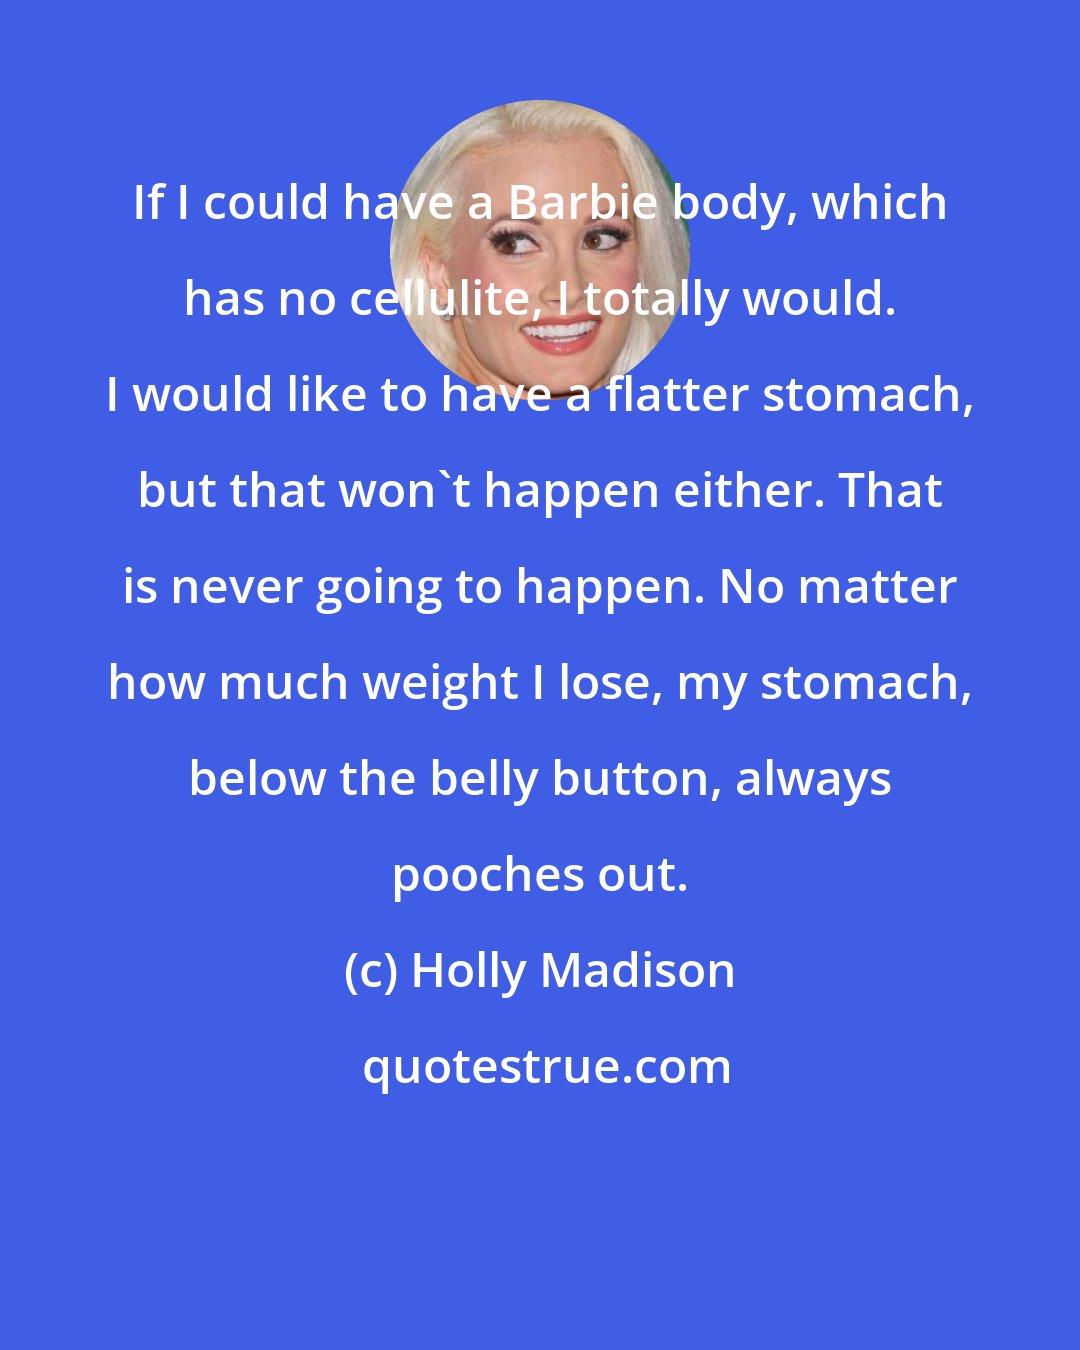 Holly Madison: If I could have a Barbie body, which has no cellulite, I totally would. I would like to have a flatter stomach, but that won't happen either. That is never going to happen. No matter how much weight I lose, my stomach, below the belly button, always pooches out.